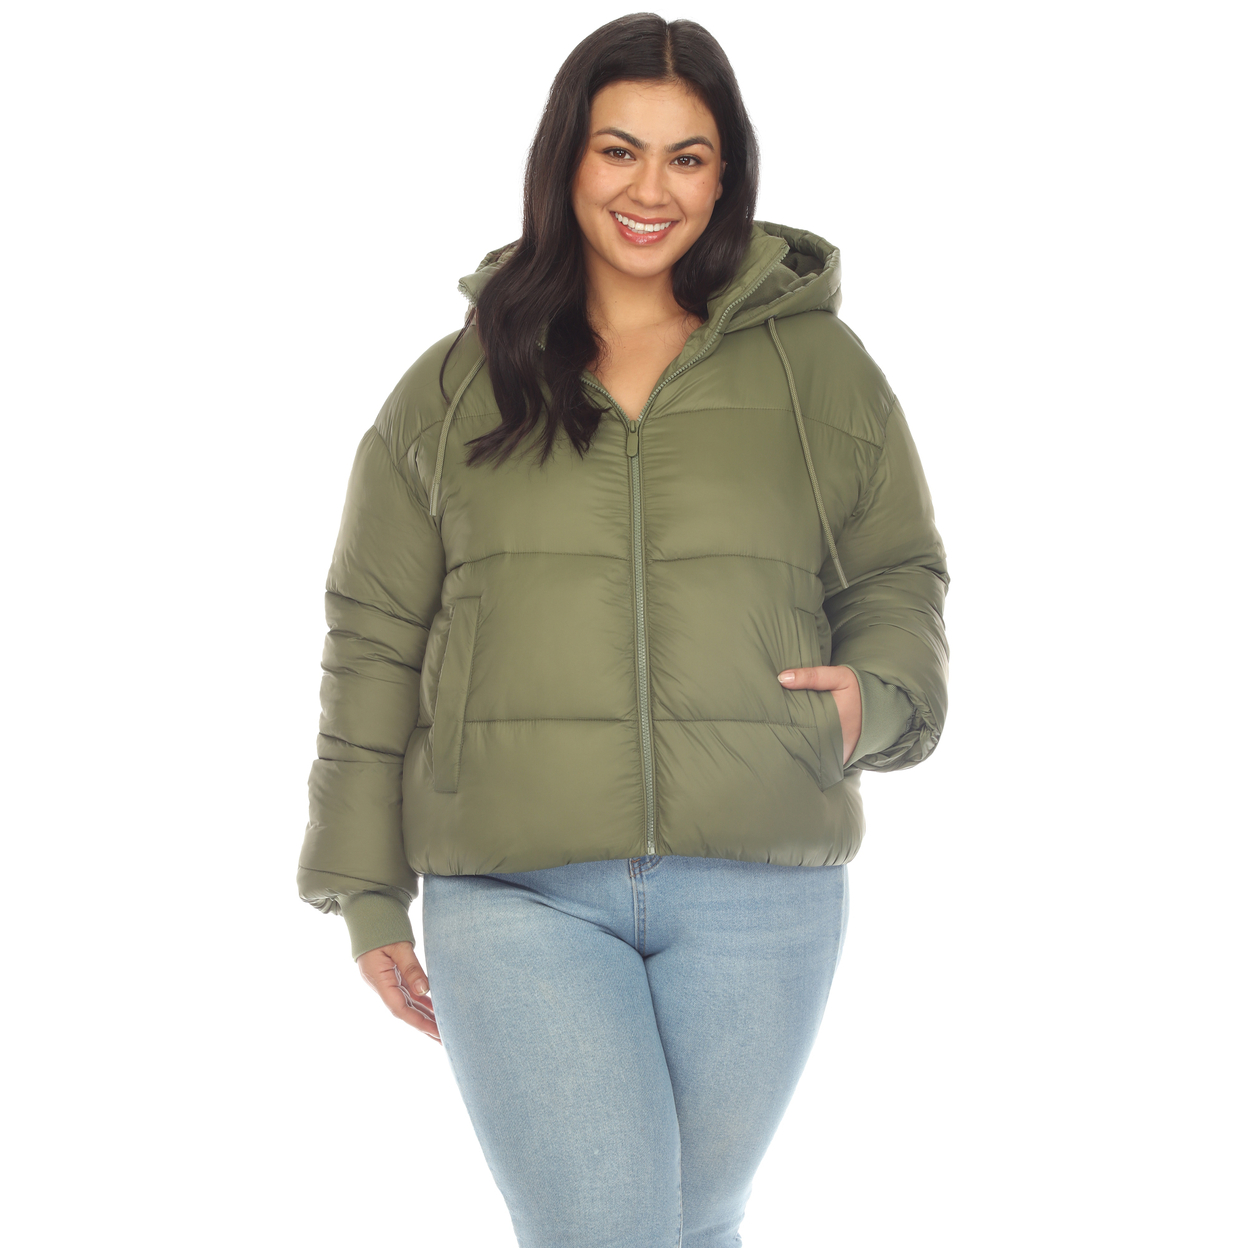 White Mark Women's Zip Hooded Puffer Jacket With Pockets - Olive, 3x